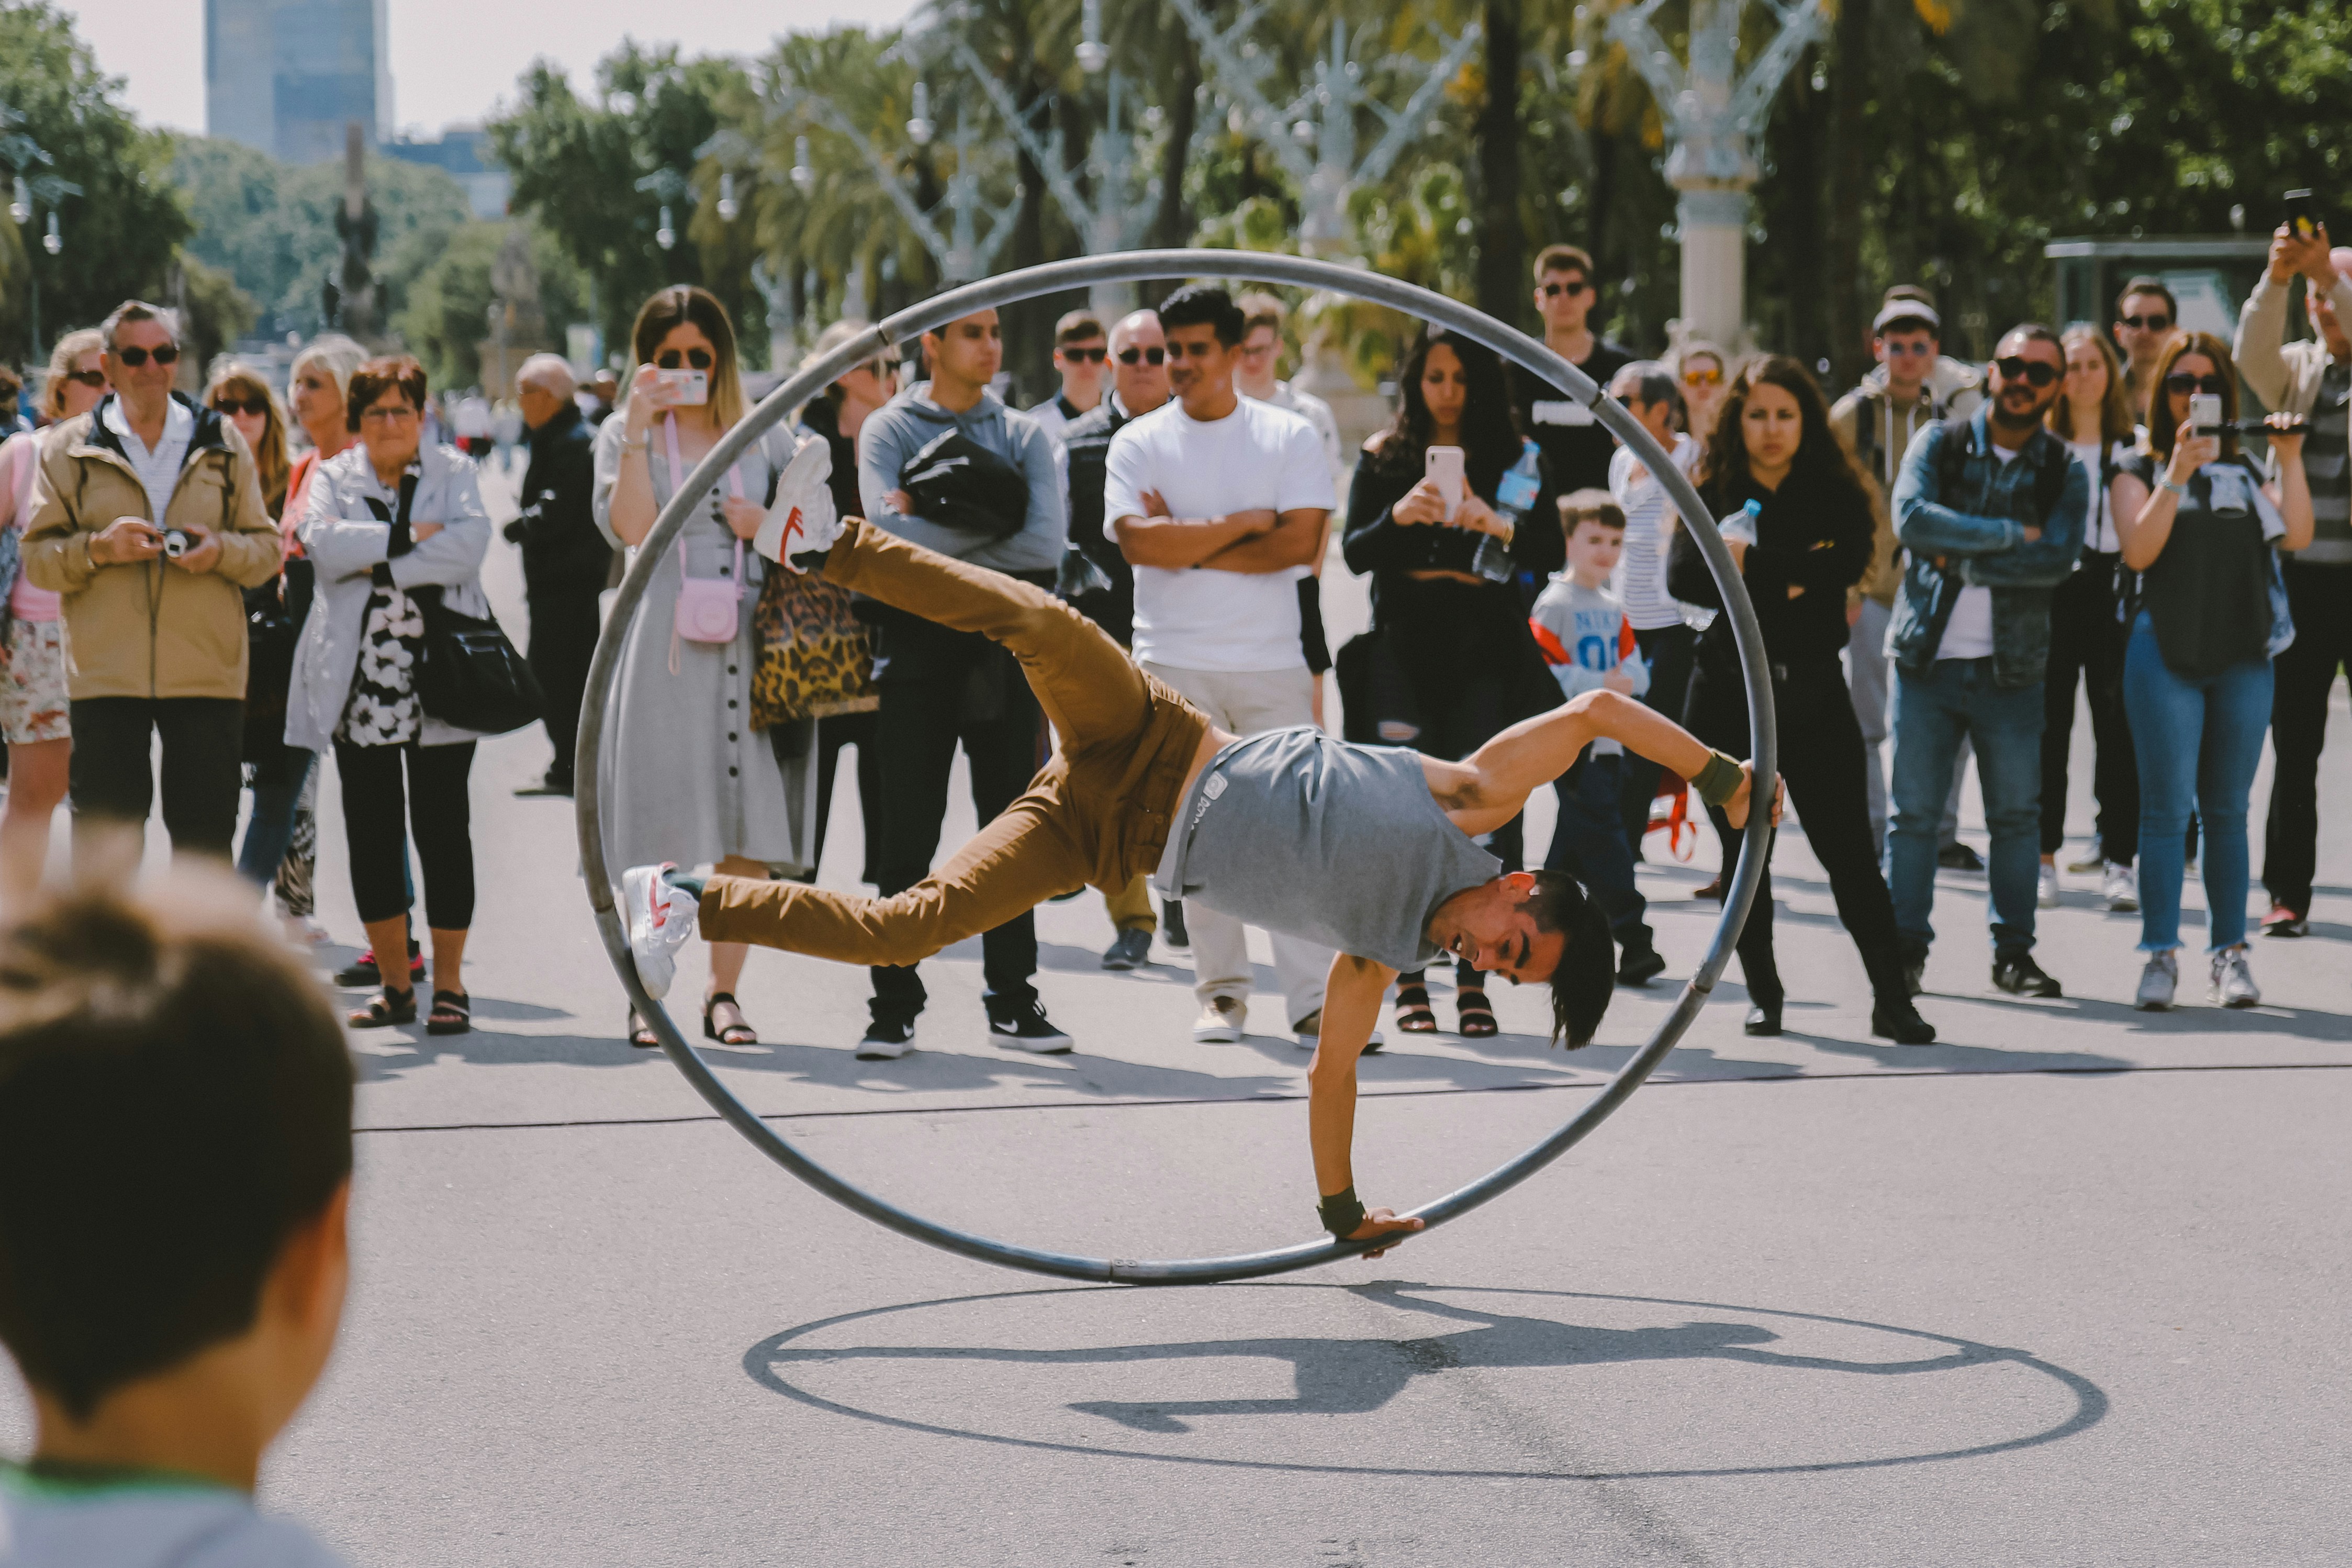 A street artist performing a stunt with a giant hula hoop in front of a crowd